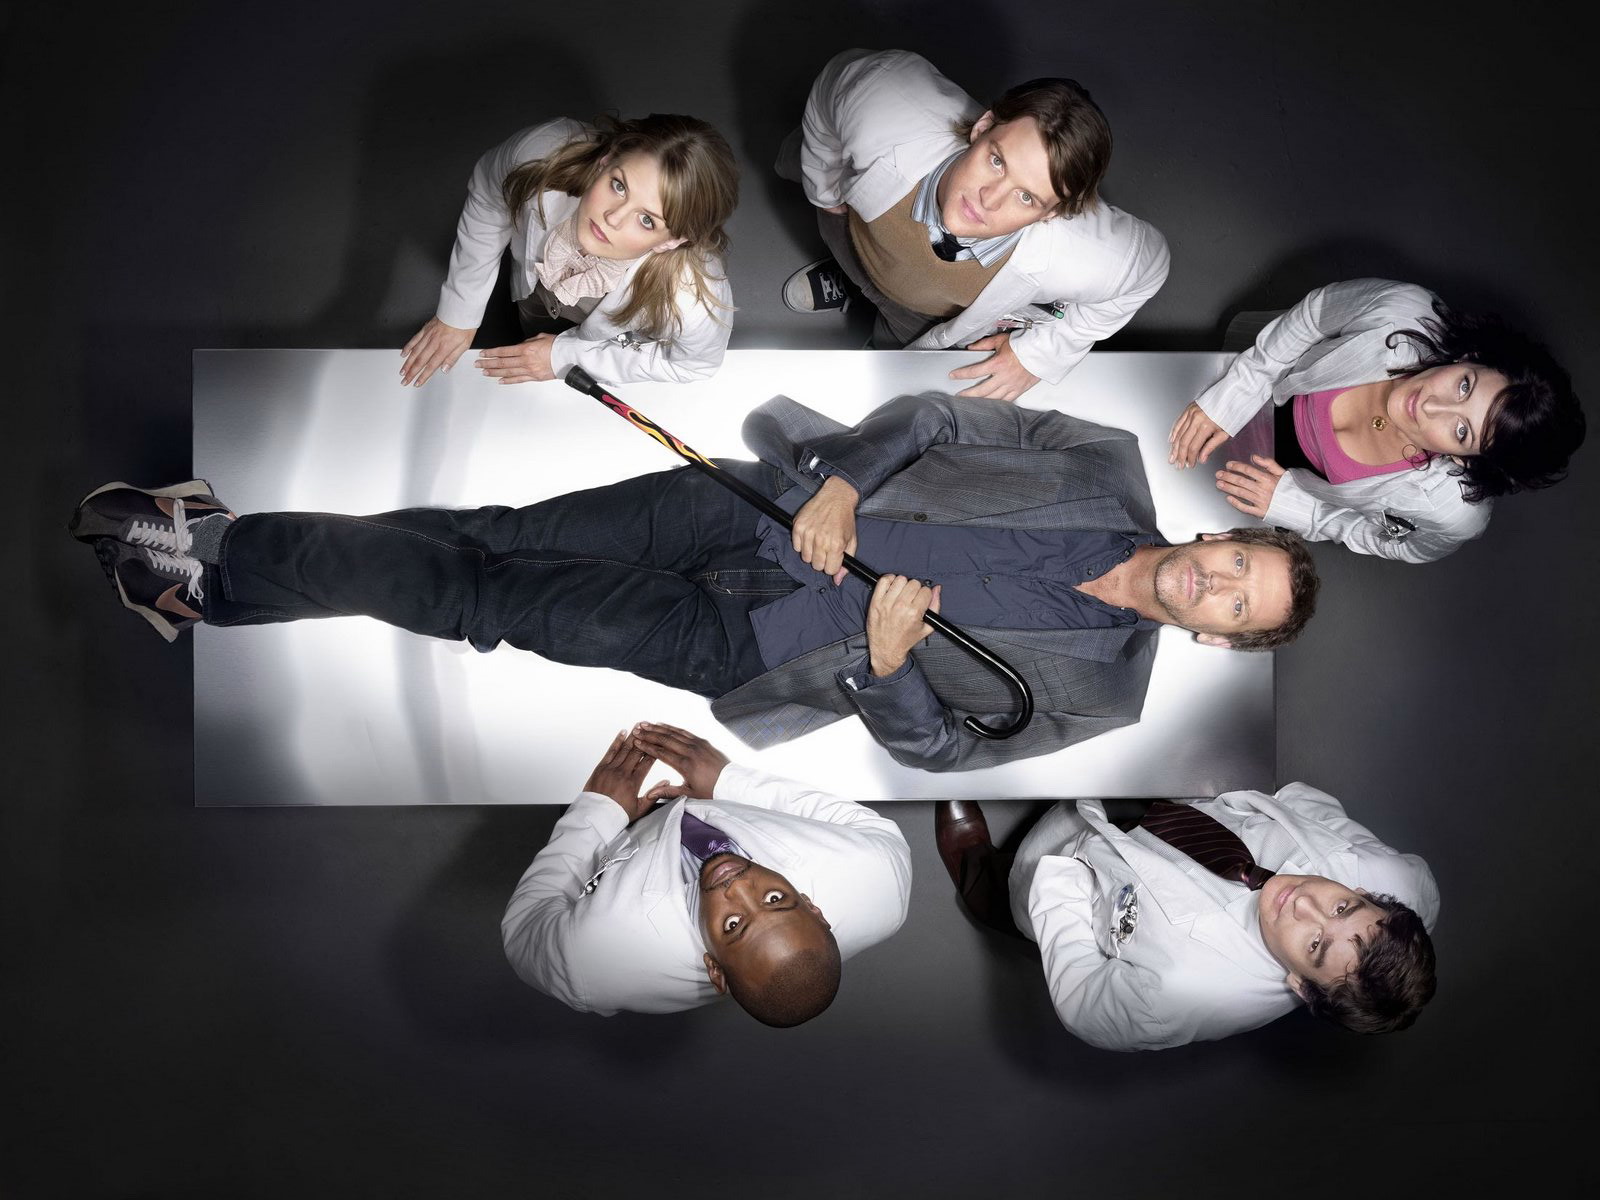 The cast of House M.D. in a group photo.